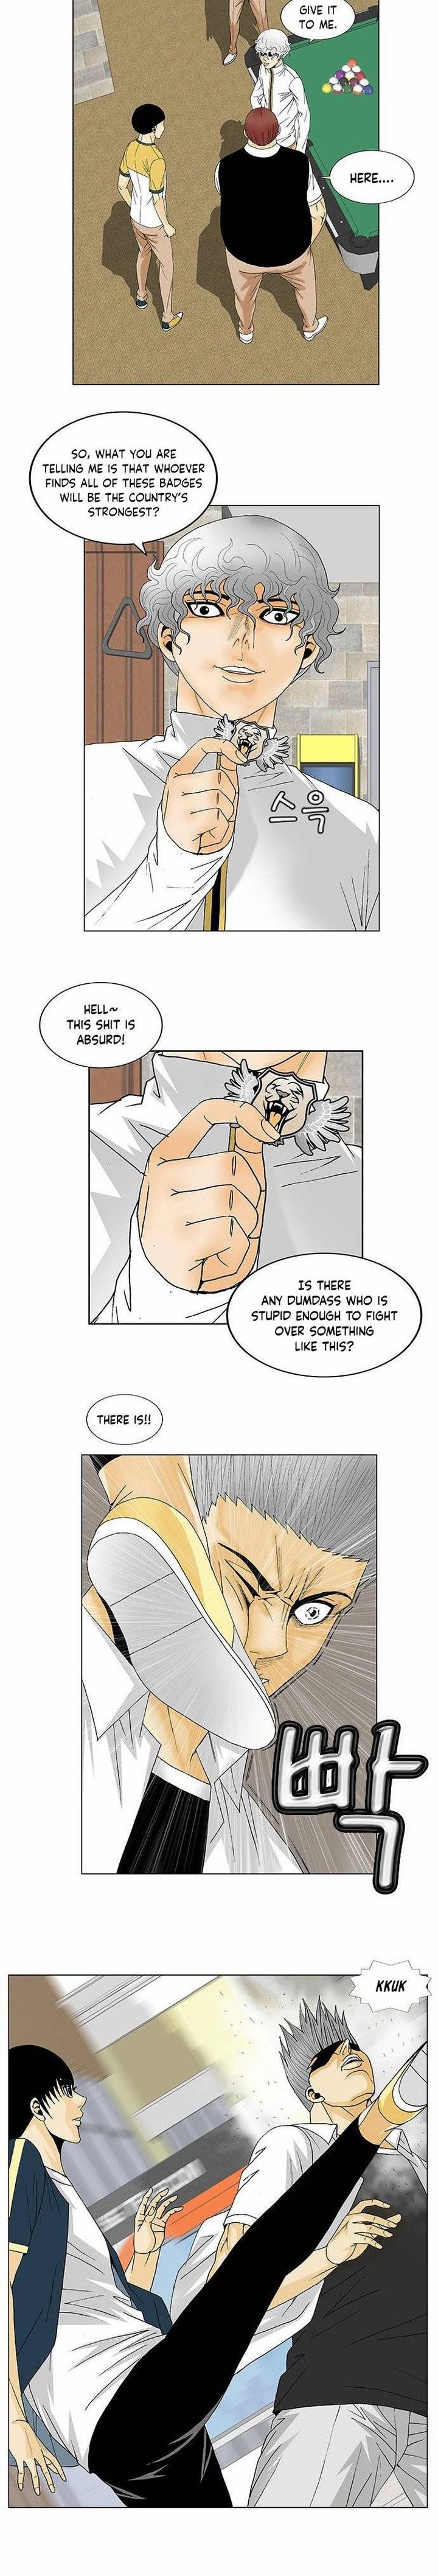 Ultimate Legend Kang Hae Hyo Chapter 116 Page 11